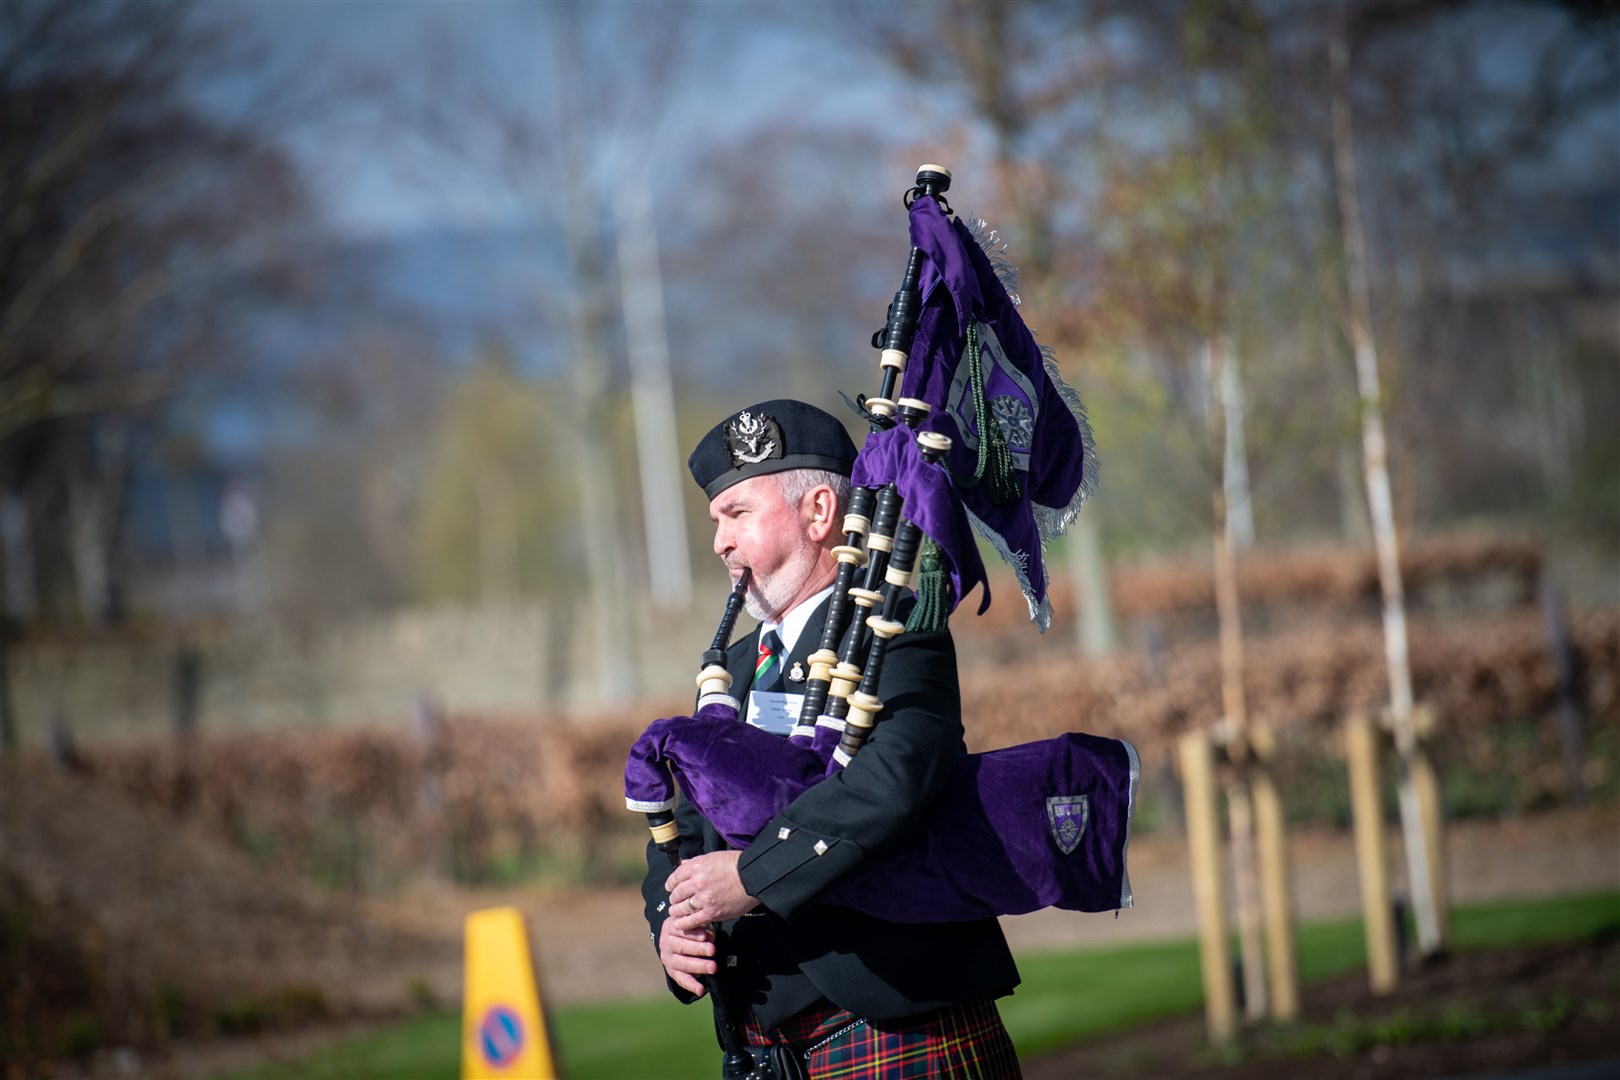 A piper greets the royal visitor.